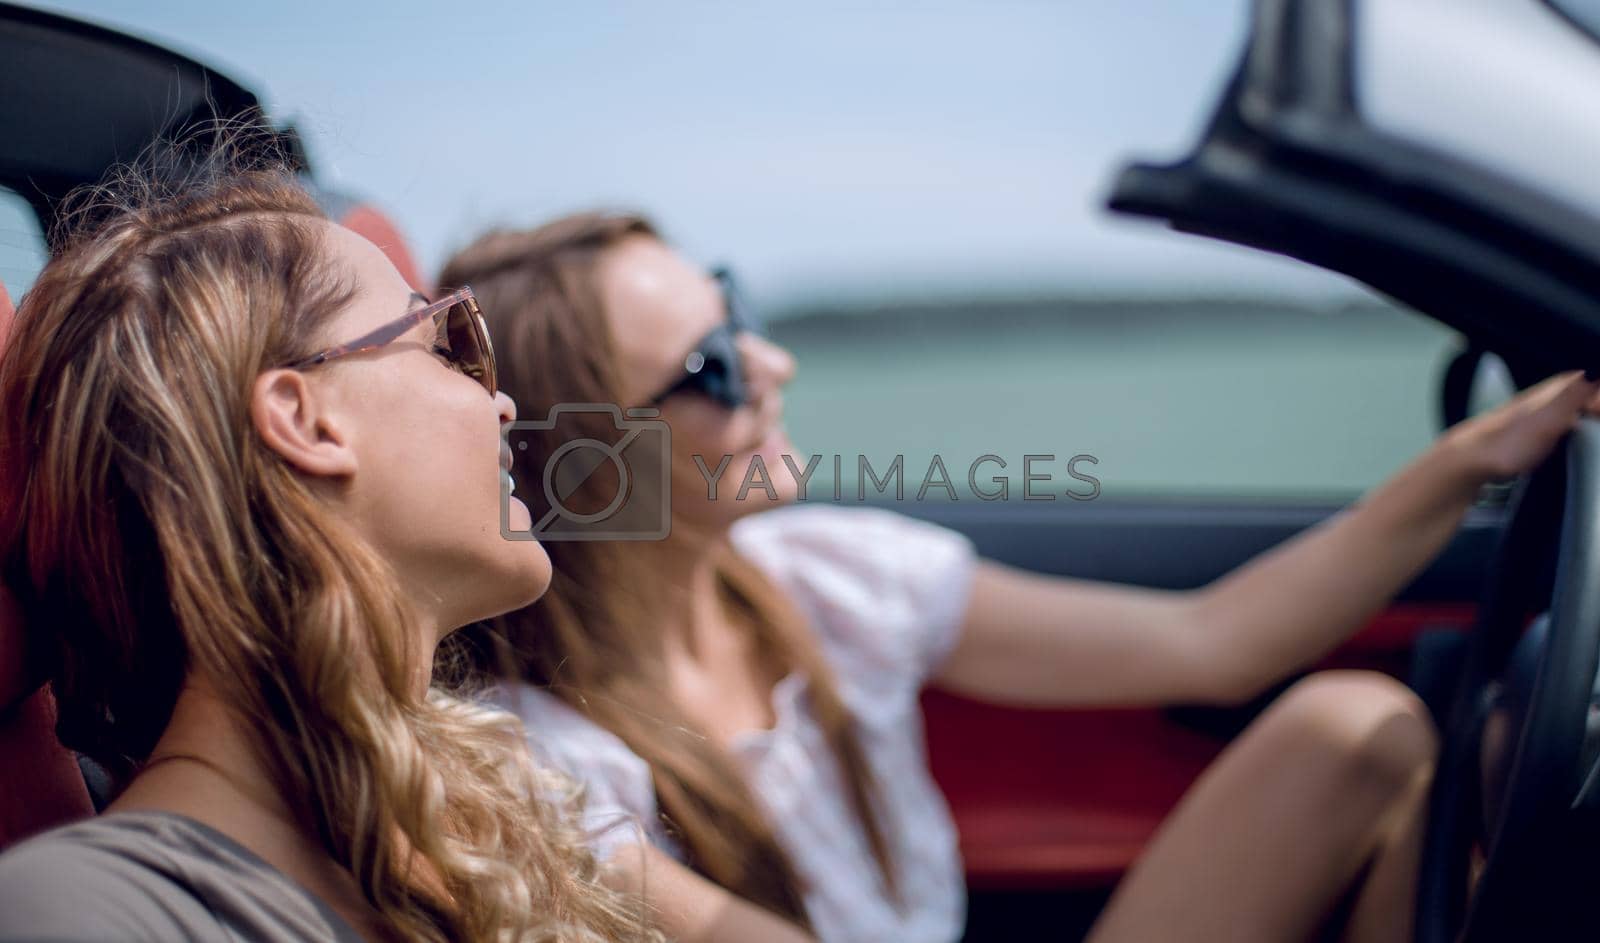 Royalty free image of young women in a convertible car. by asdf